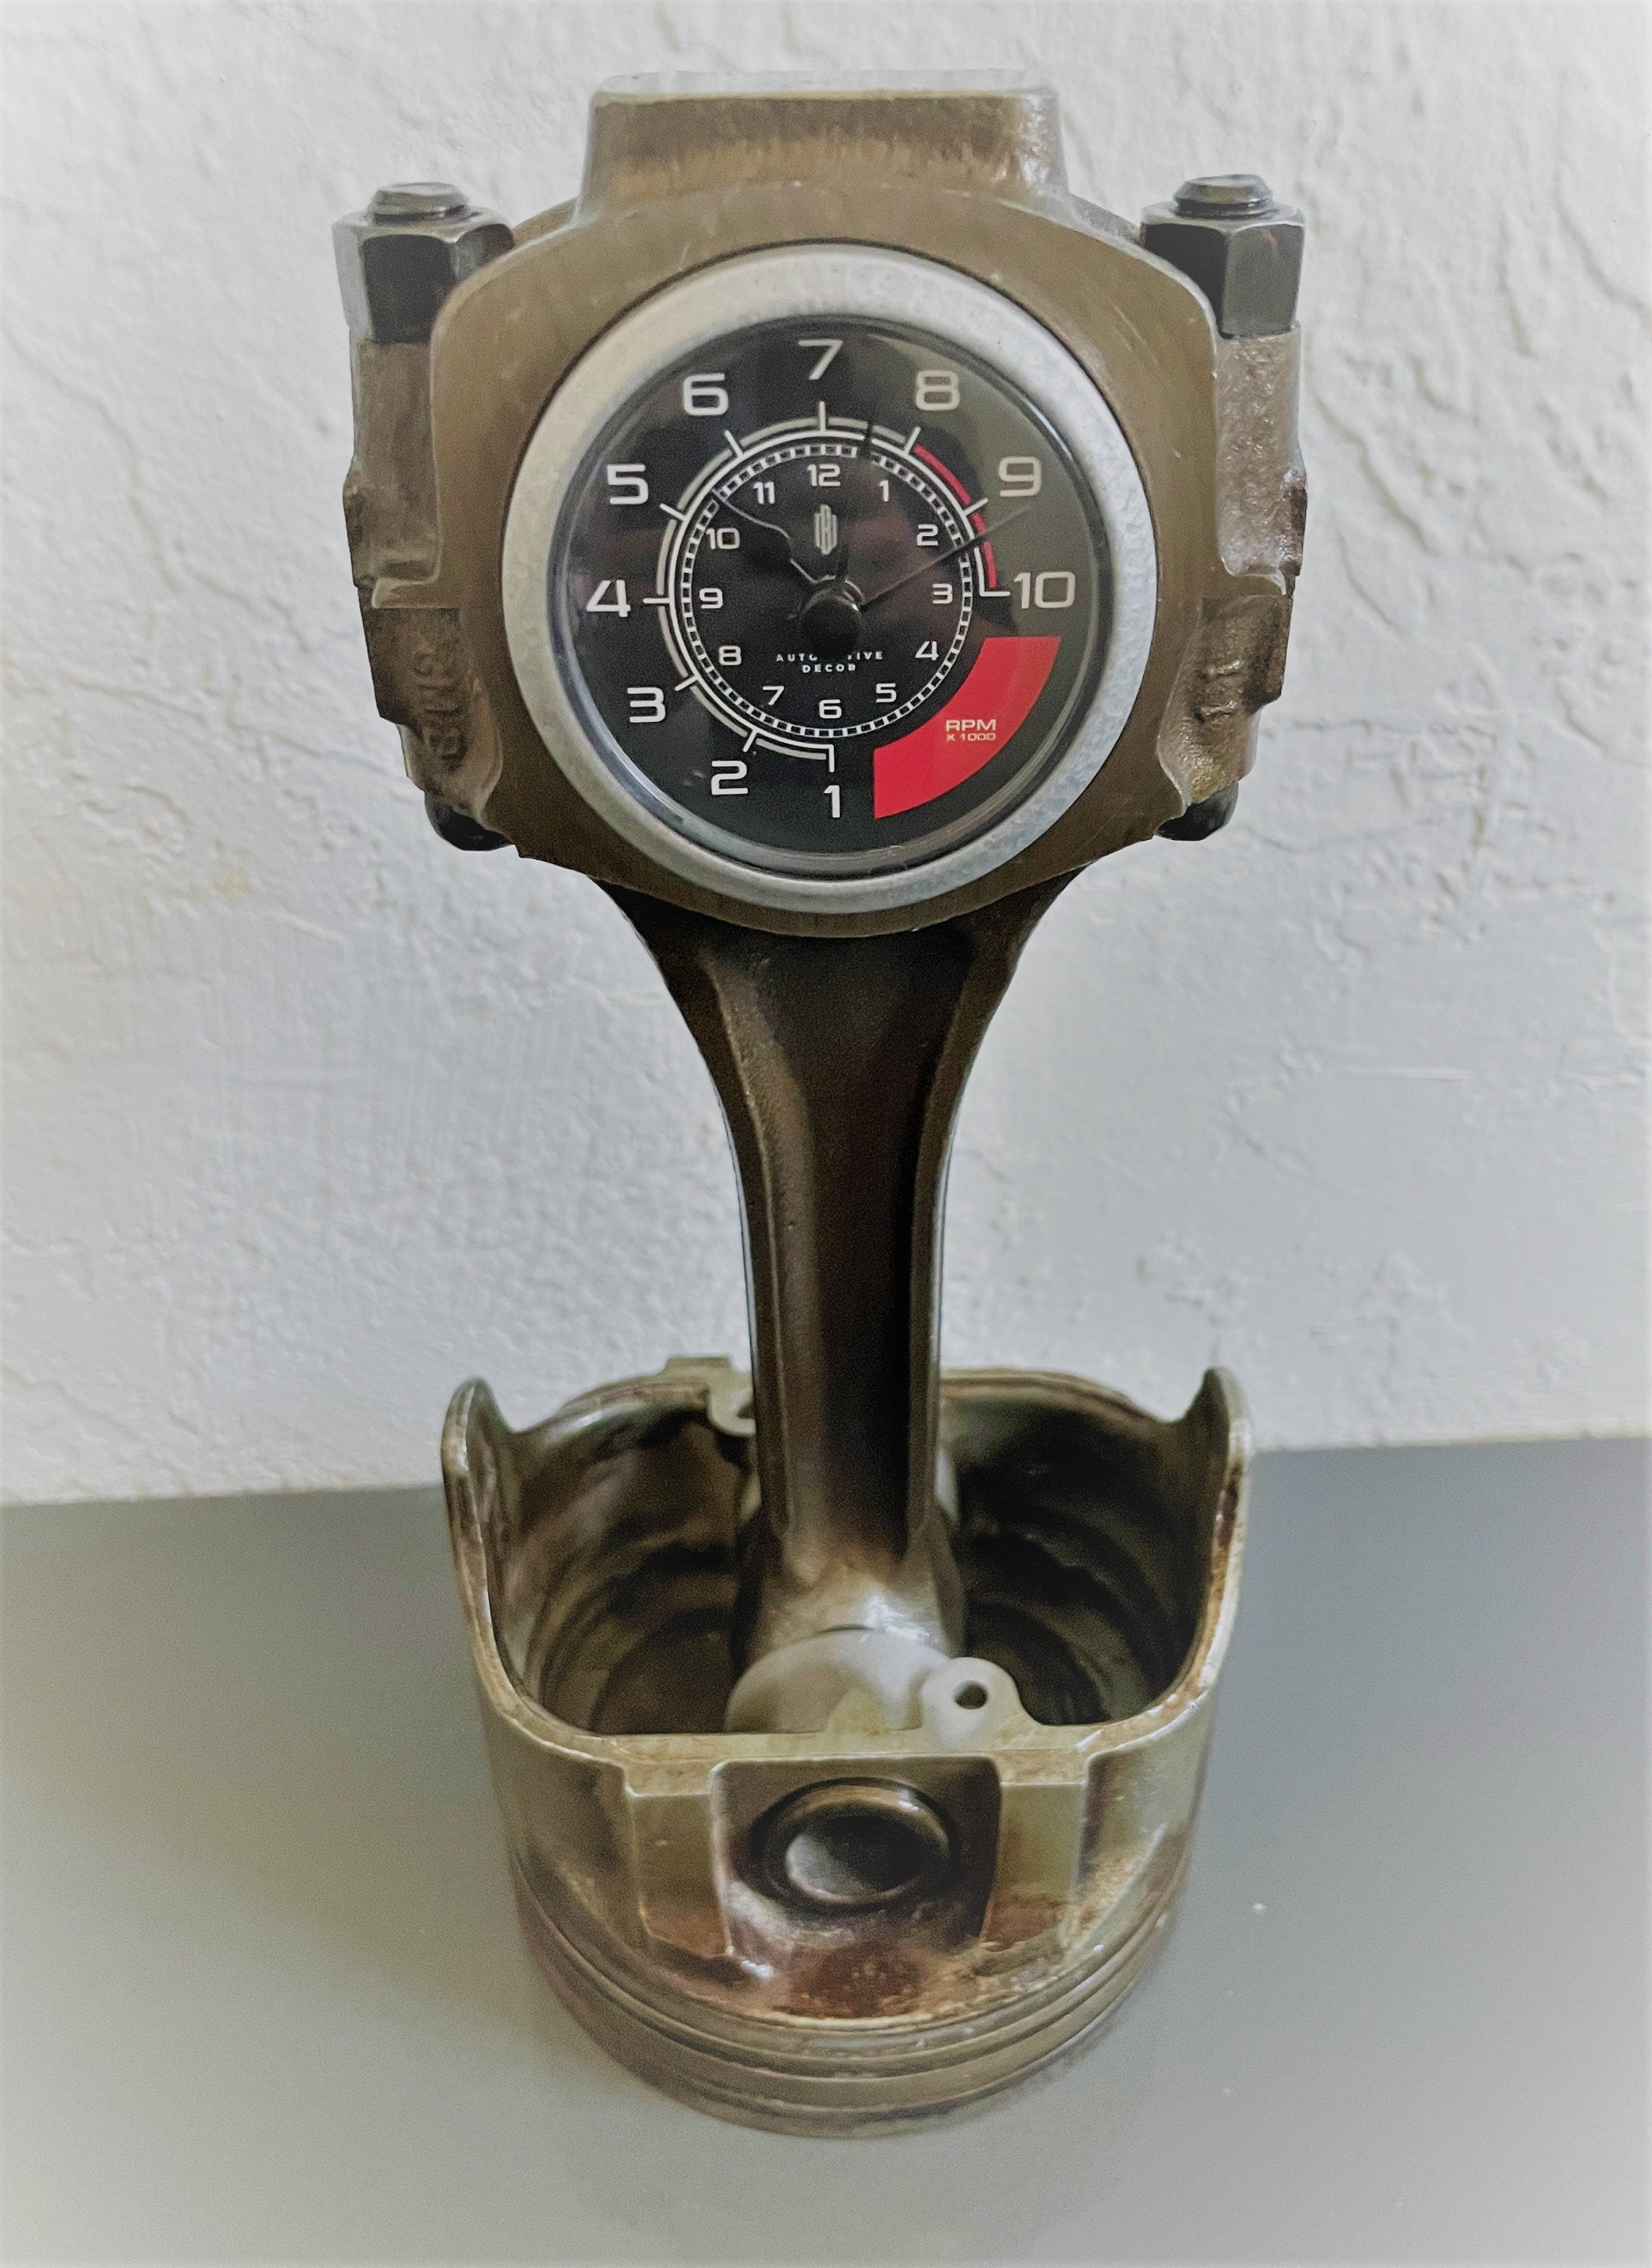 A car piston clock in a patina finish with a silver clock ring and black and red RPM clock face.